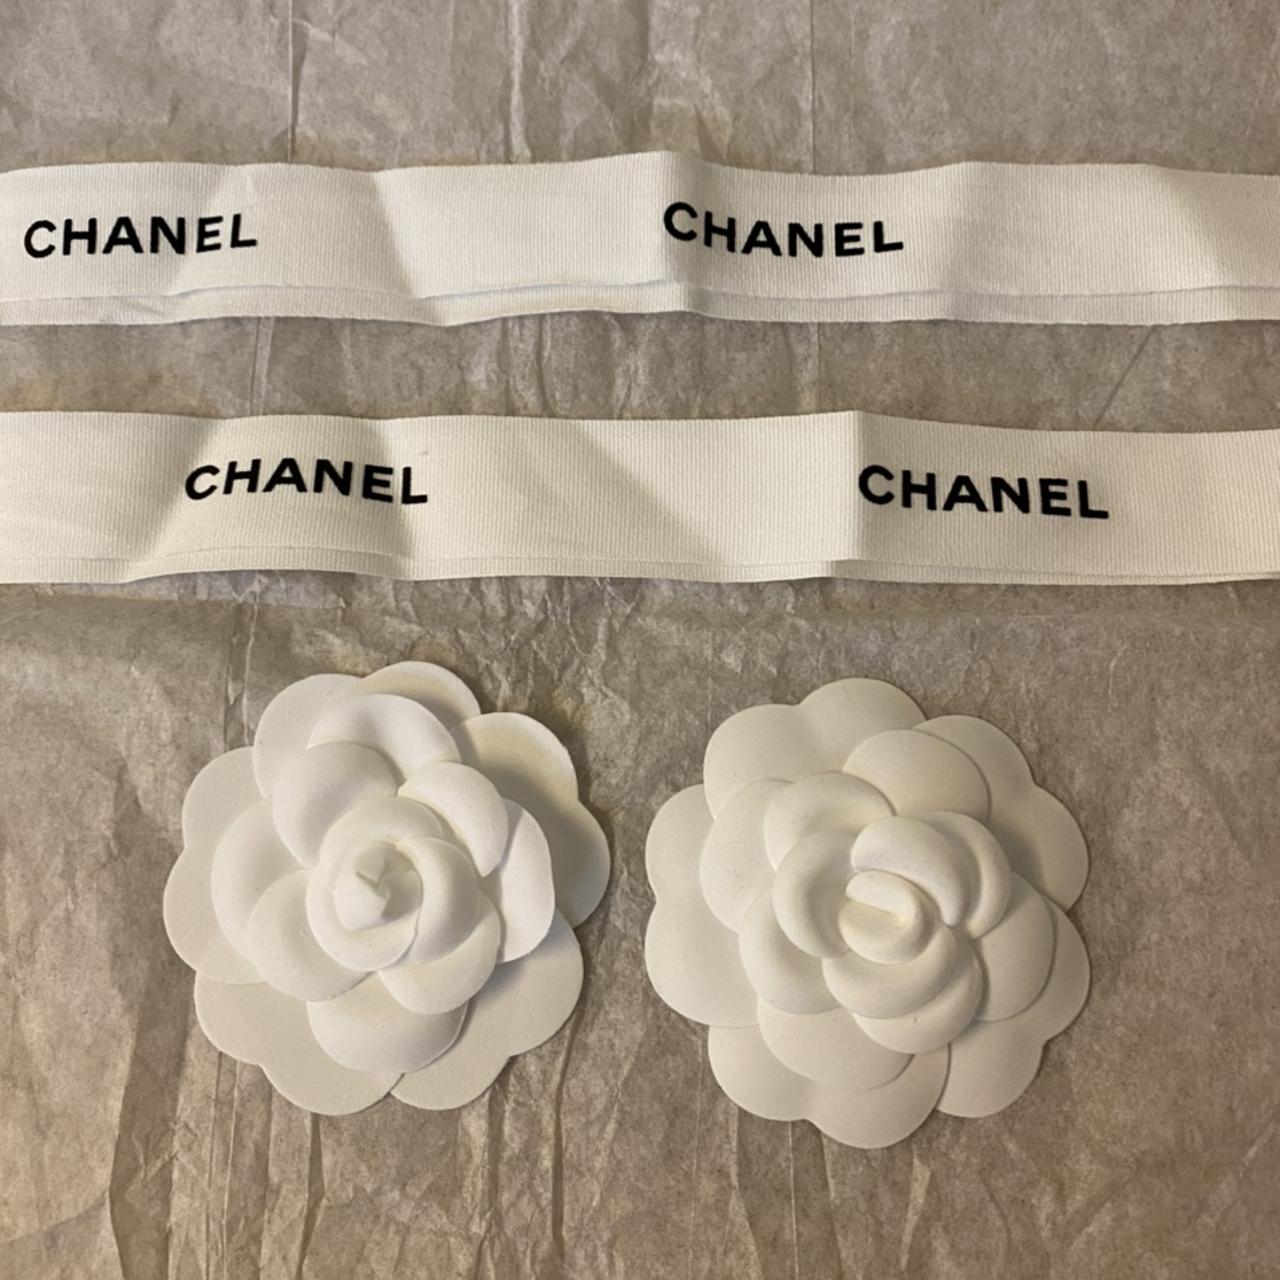 2 Chanel flowers and 2 ribbons, can fit small box. - Depop